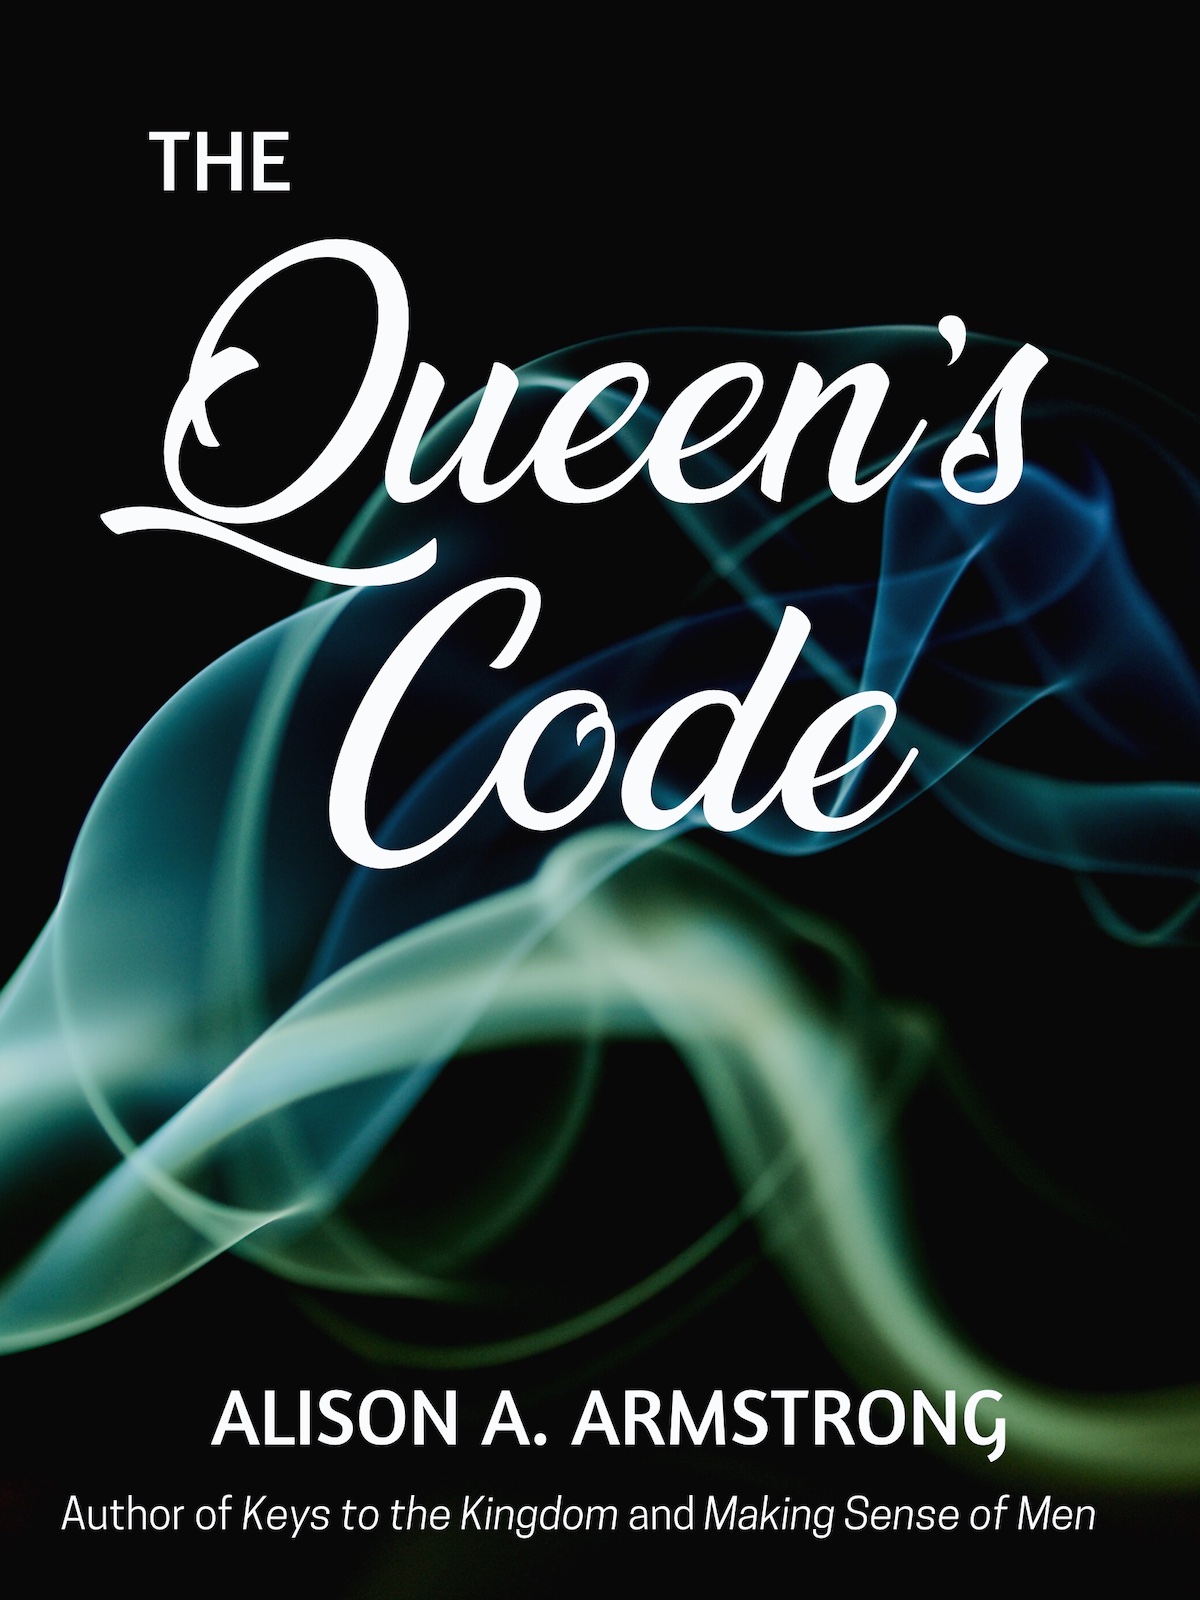 The Queen's Code, by Alison A. Armstrong